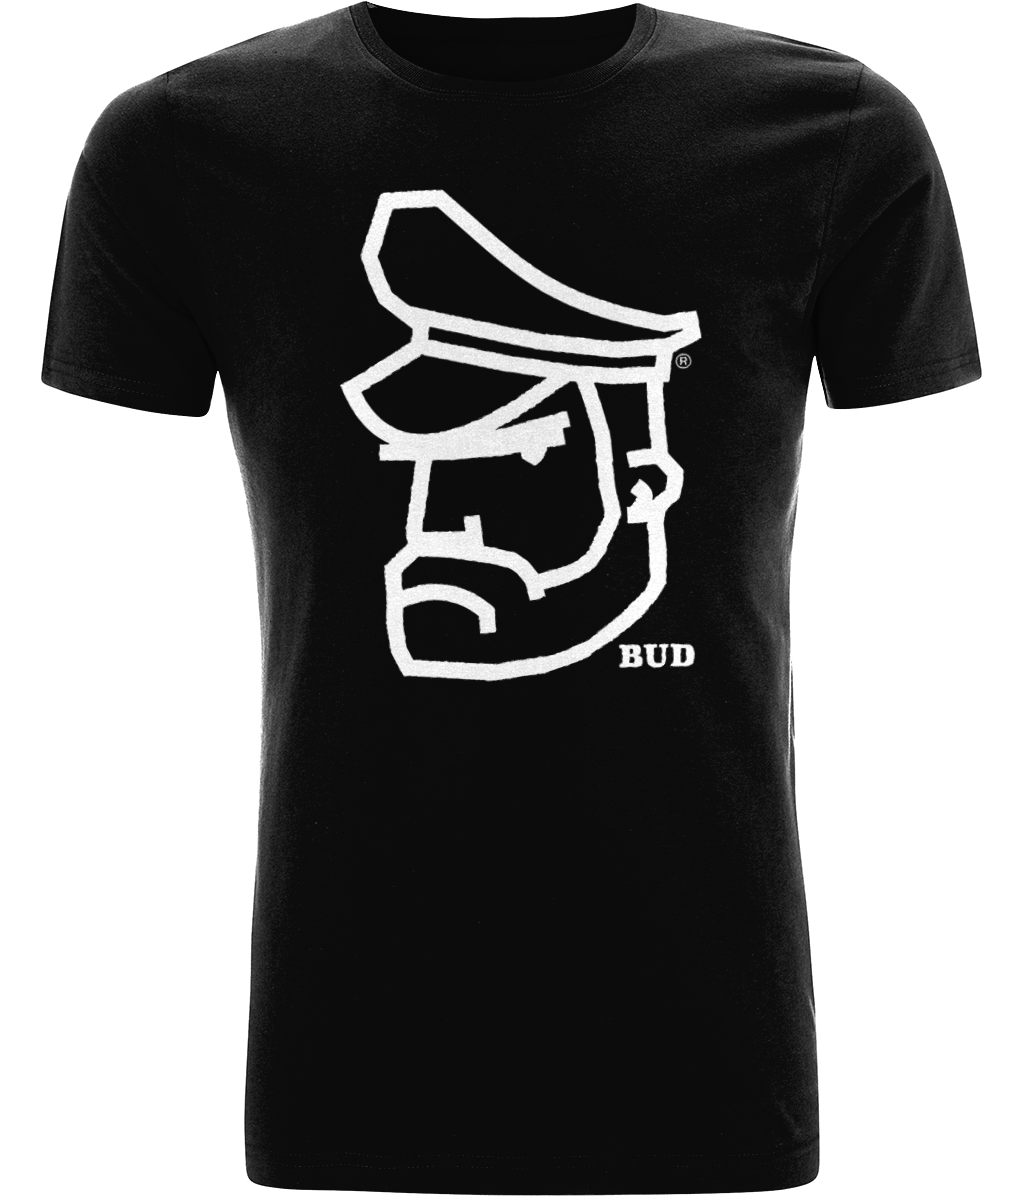 Classic Black Bud Fitted T